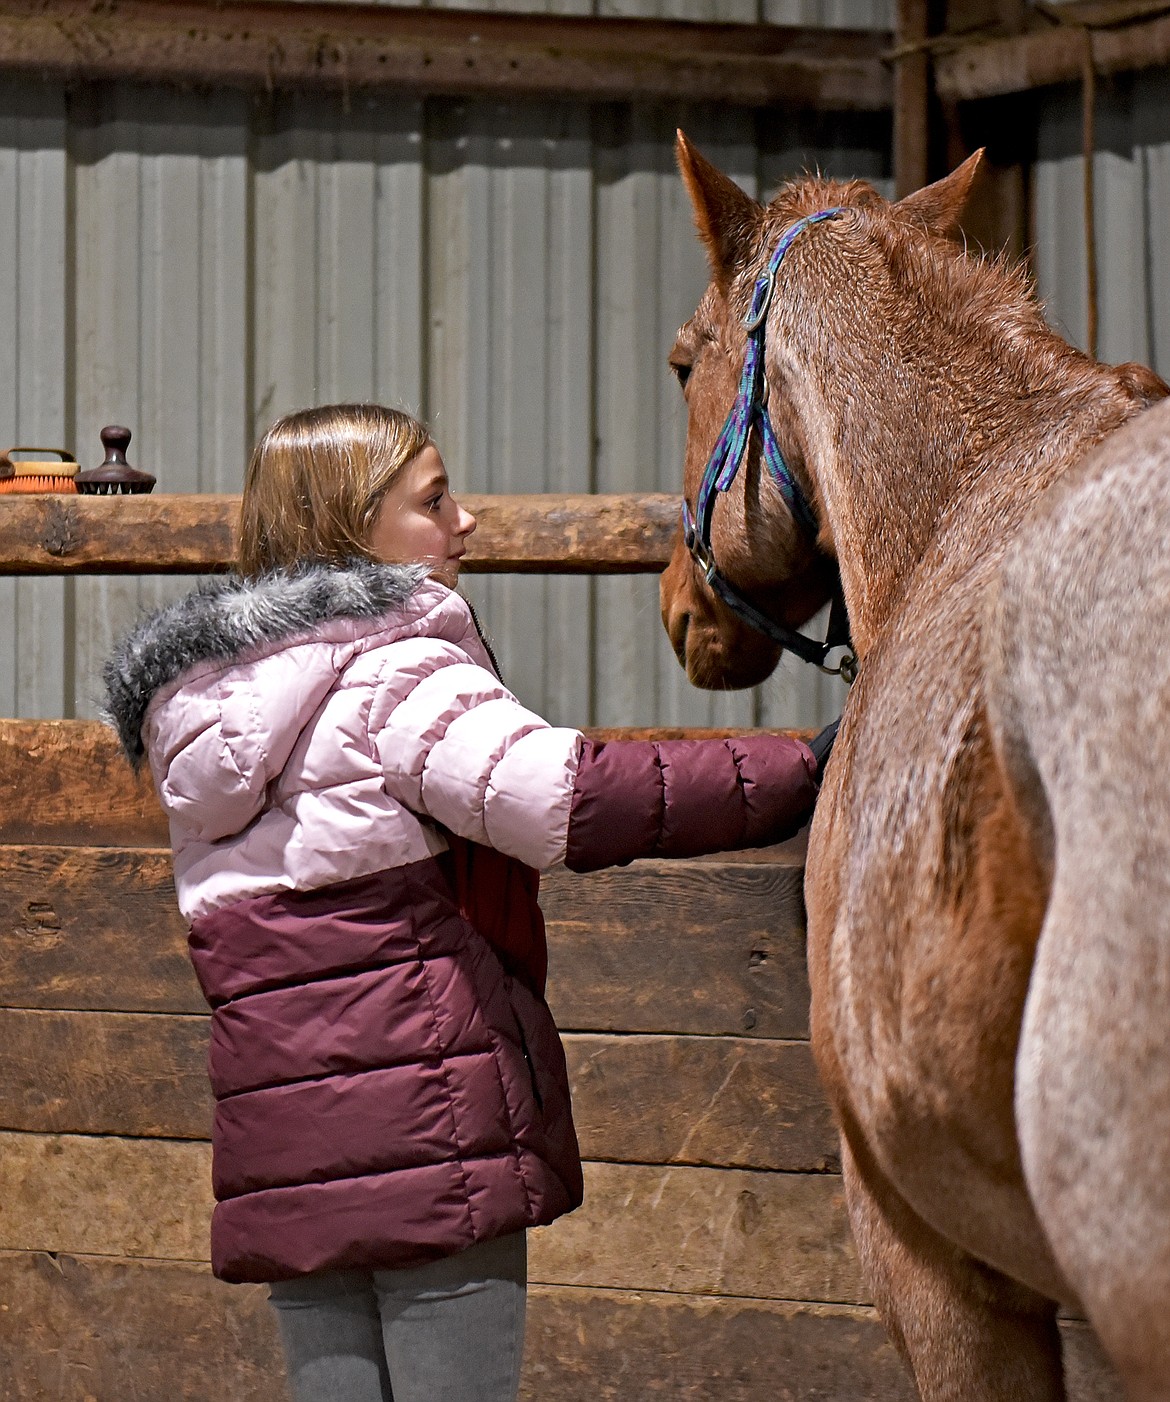 Whitefish Christian Academy sixth grade student Madison Erickson gently embraces a horse at Lost Creek Ranch as part of the school's Horsemanship Program on Friday, Nov. 12. (Whitney England/Whitefish Pilot)